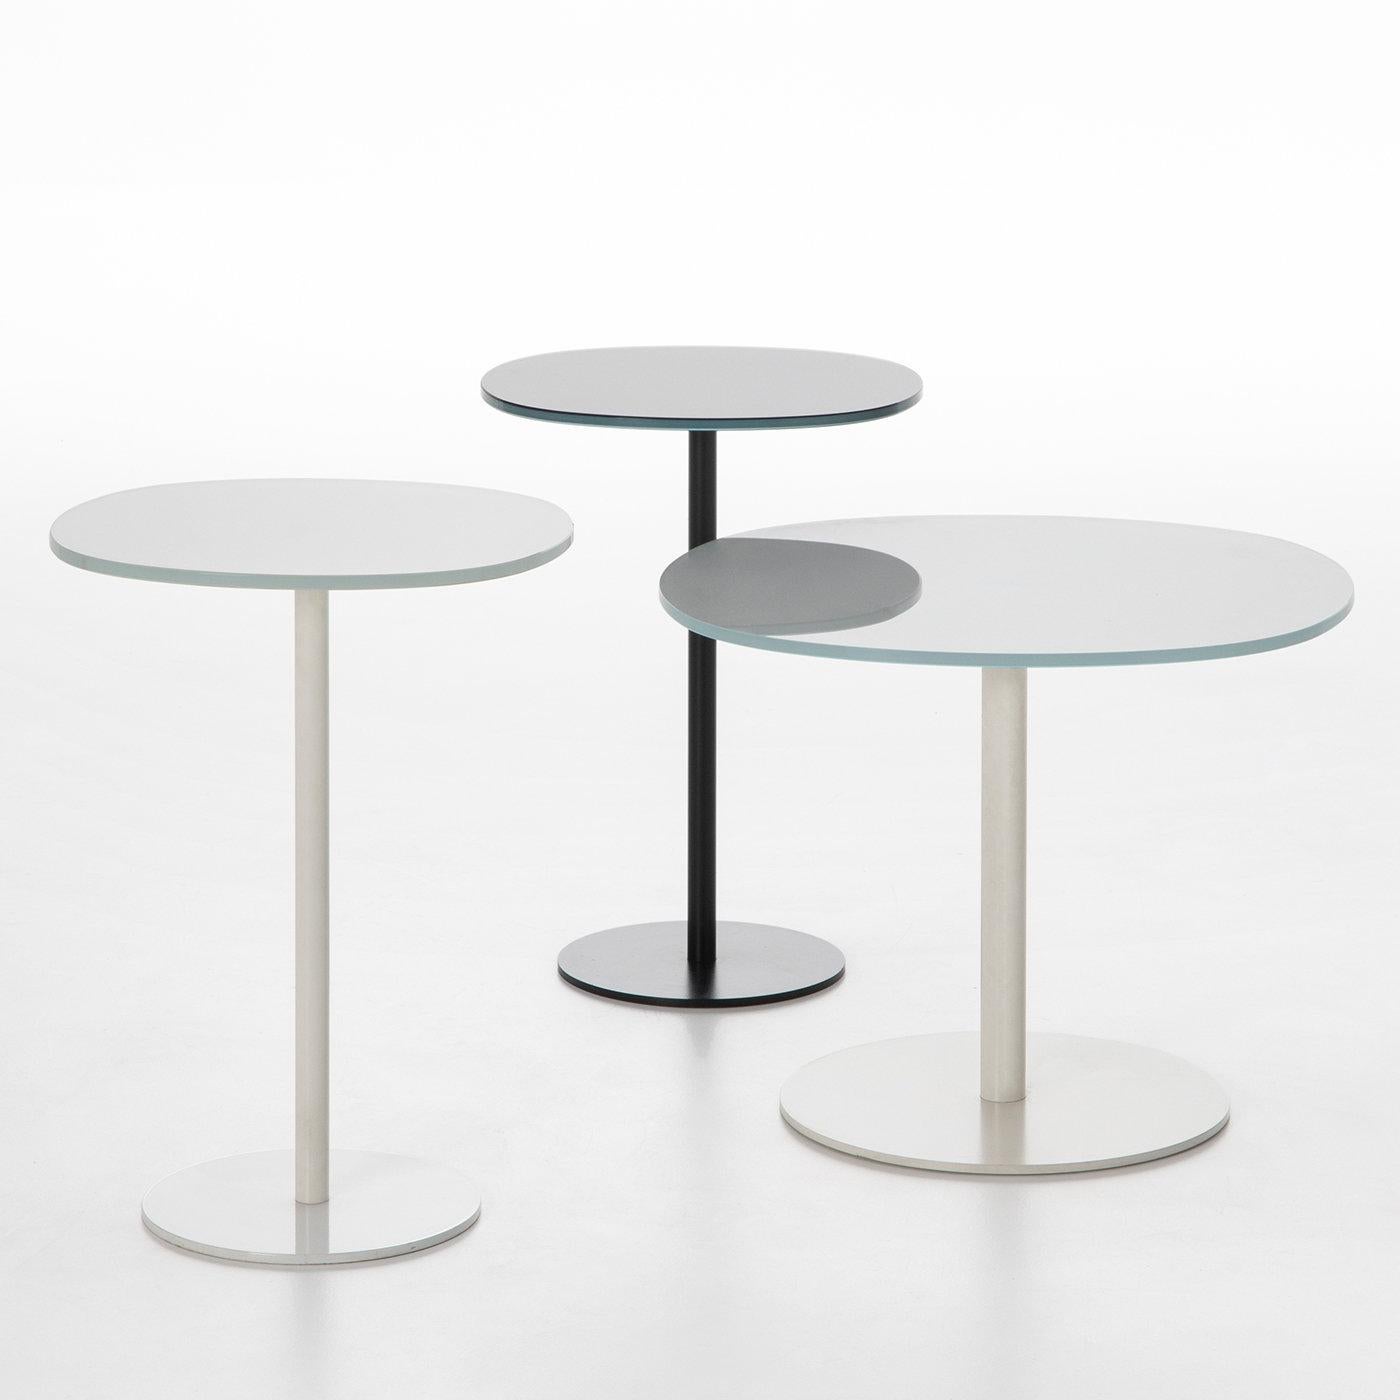 This side table by Piero Lissoni exemplifies how minimalist lines can be uplifted by subtle yet impressive detail. Raised on a black-lacquered metal base comprising a round plate from which stems slender cylindrical support, the glass top